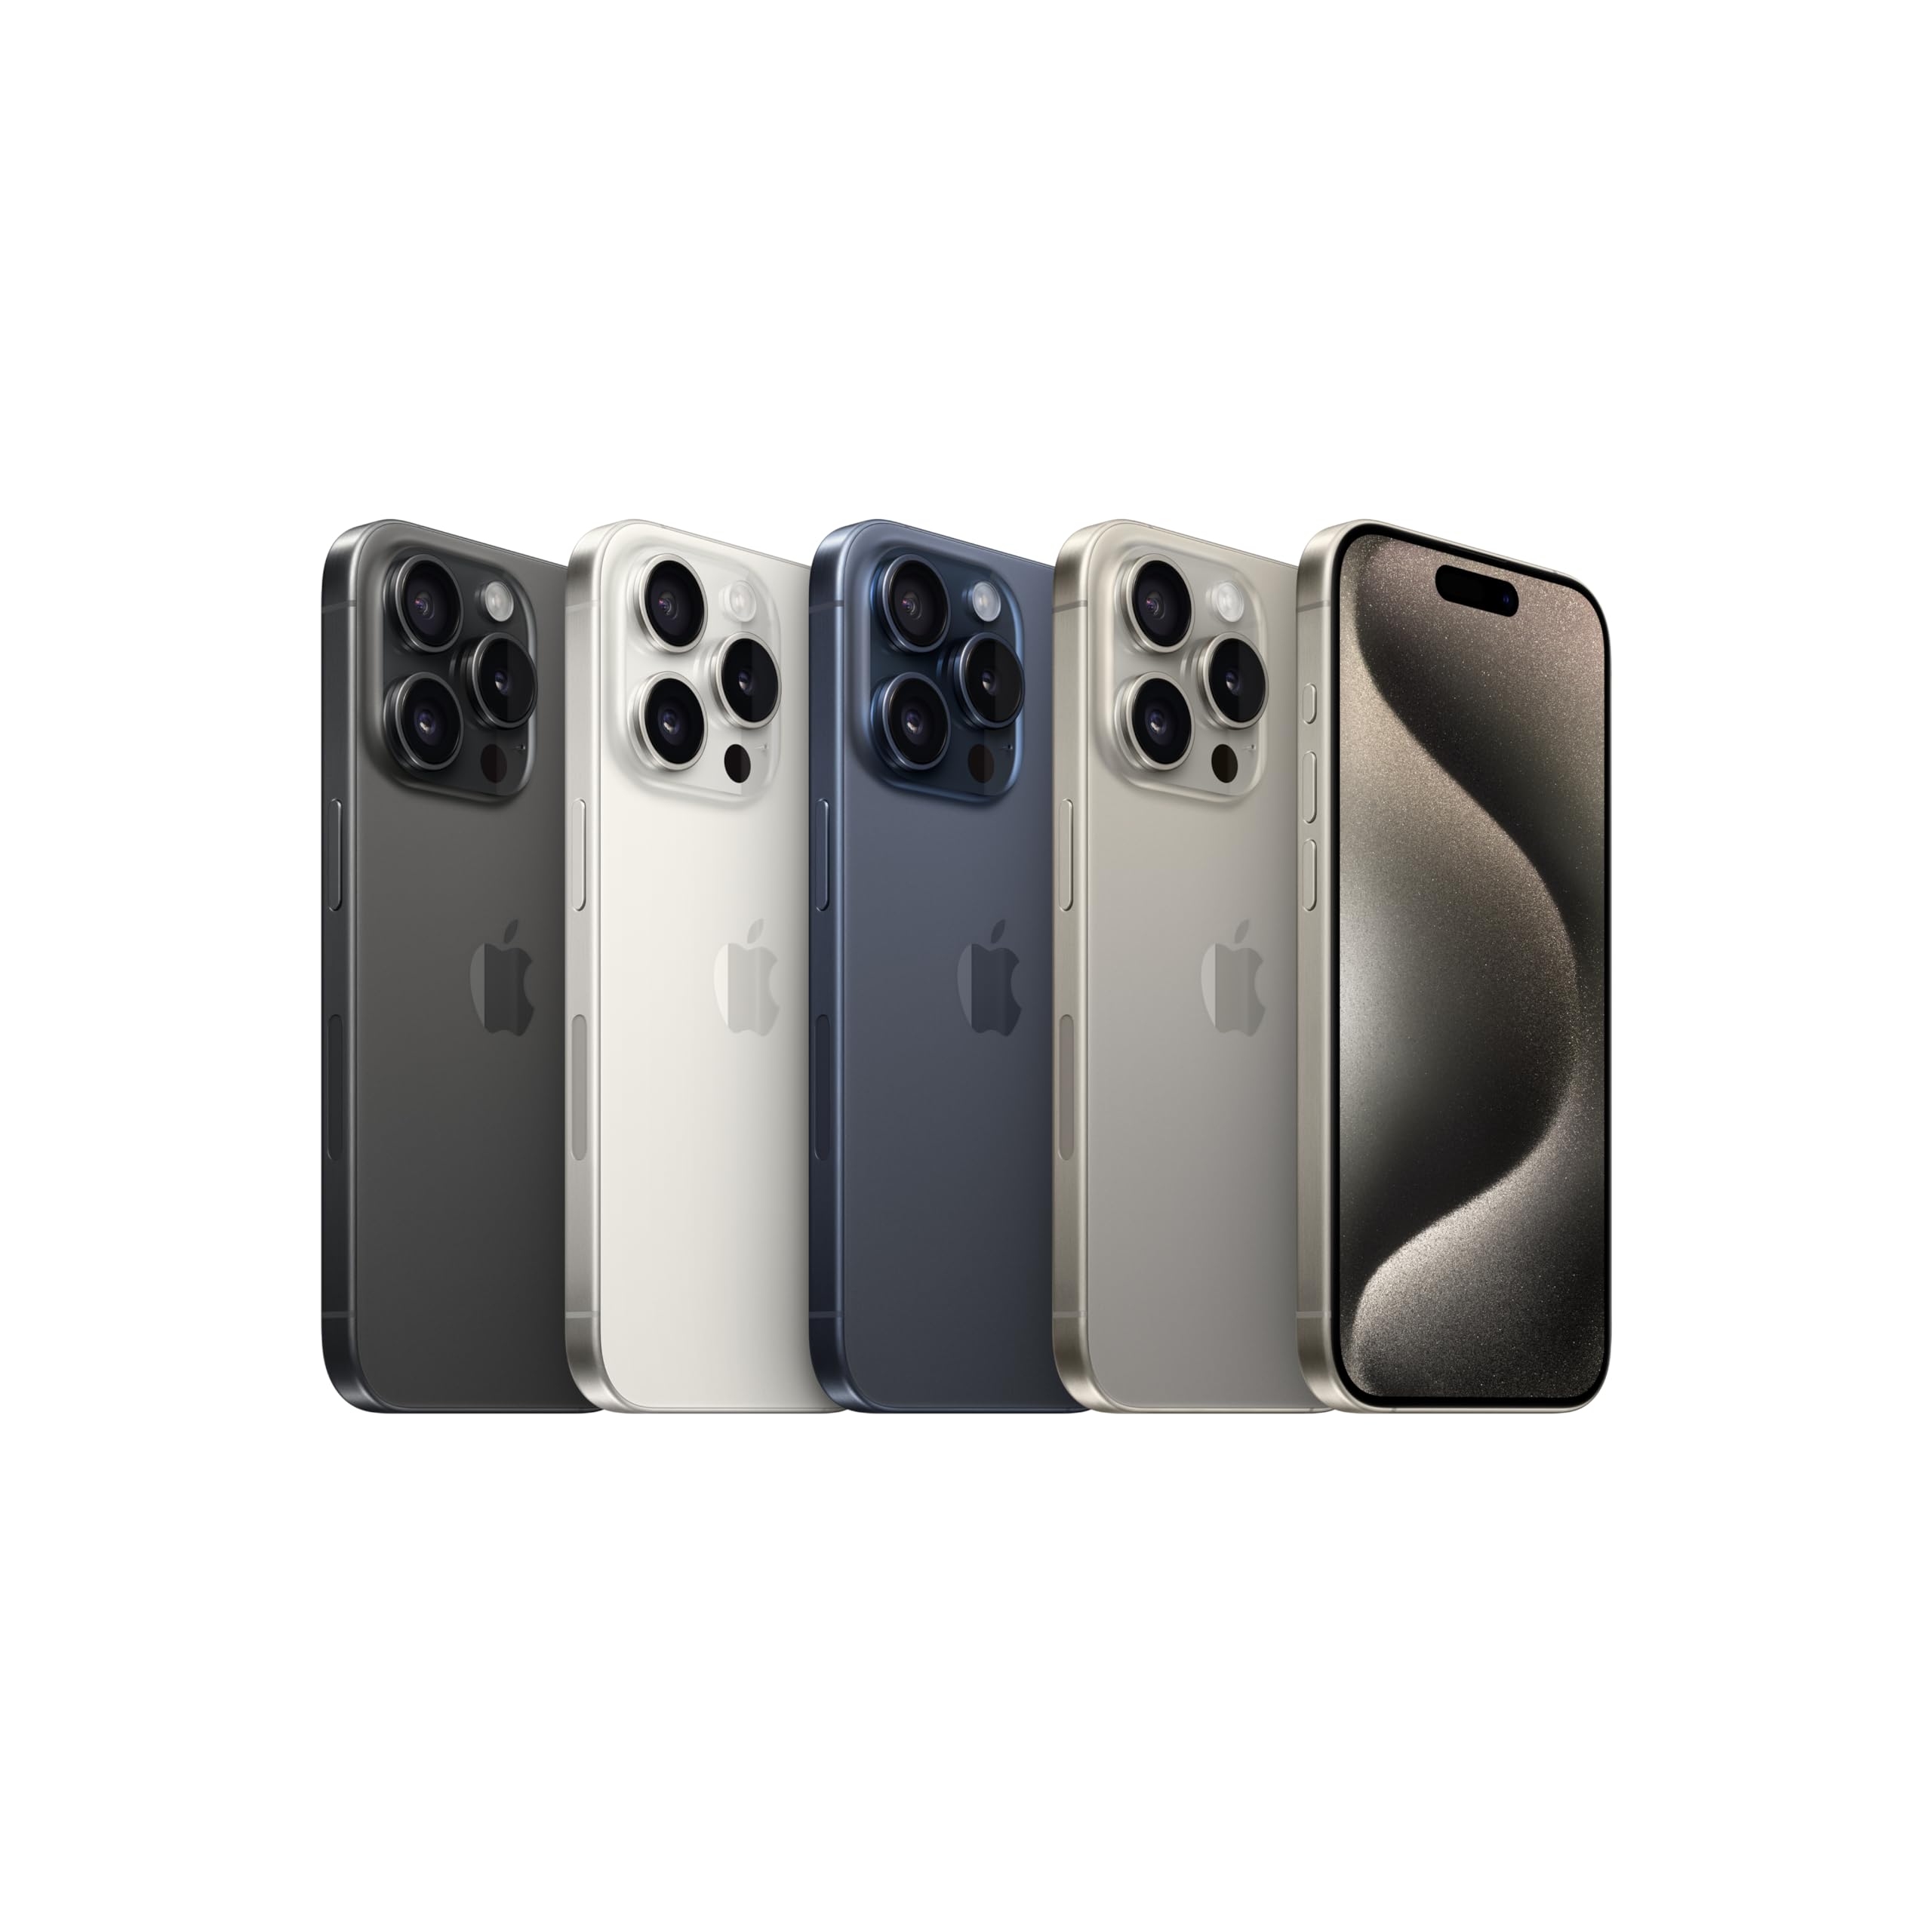 Apple iPhone 15 Pro (256 GB) - Natural Titanium | [Locked] | Boost Infinite plan required starting at $60/mo. | Unlimited Wireless | No trade-in needed to start | Get the latest iPhone every year